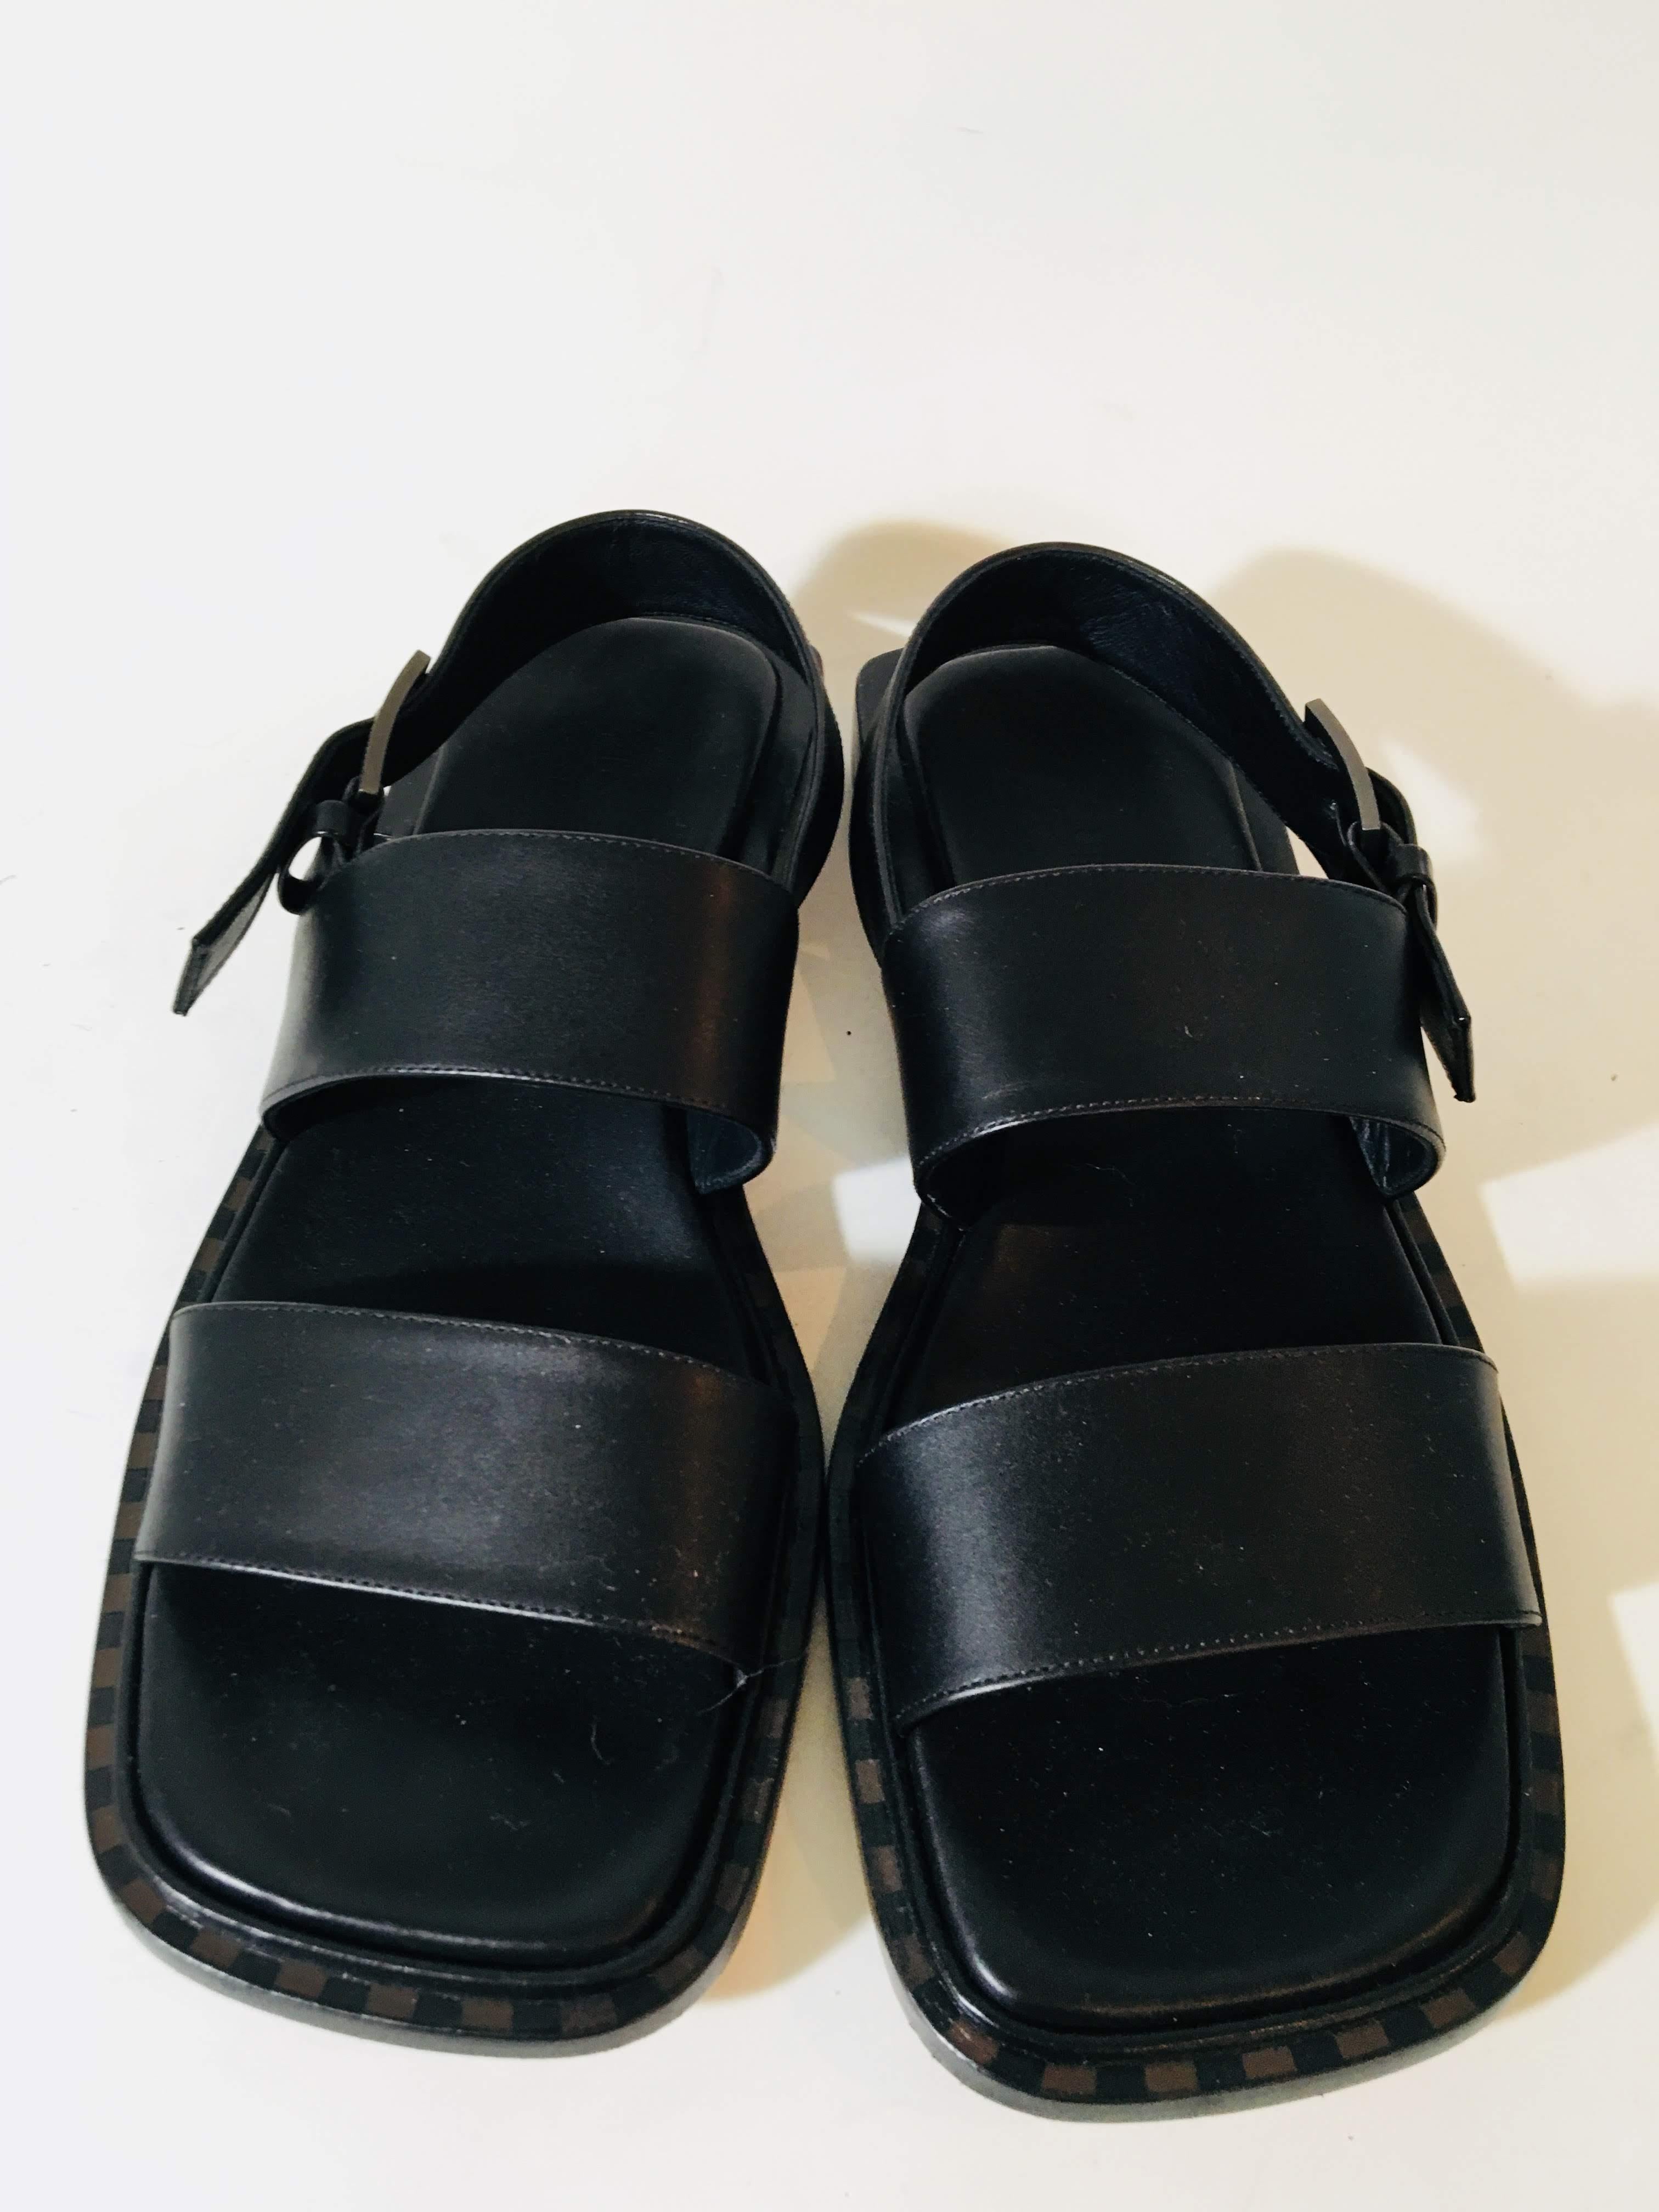 Louis Vuitton Black Leather Double Strap with Ankle Strap and Buckle.